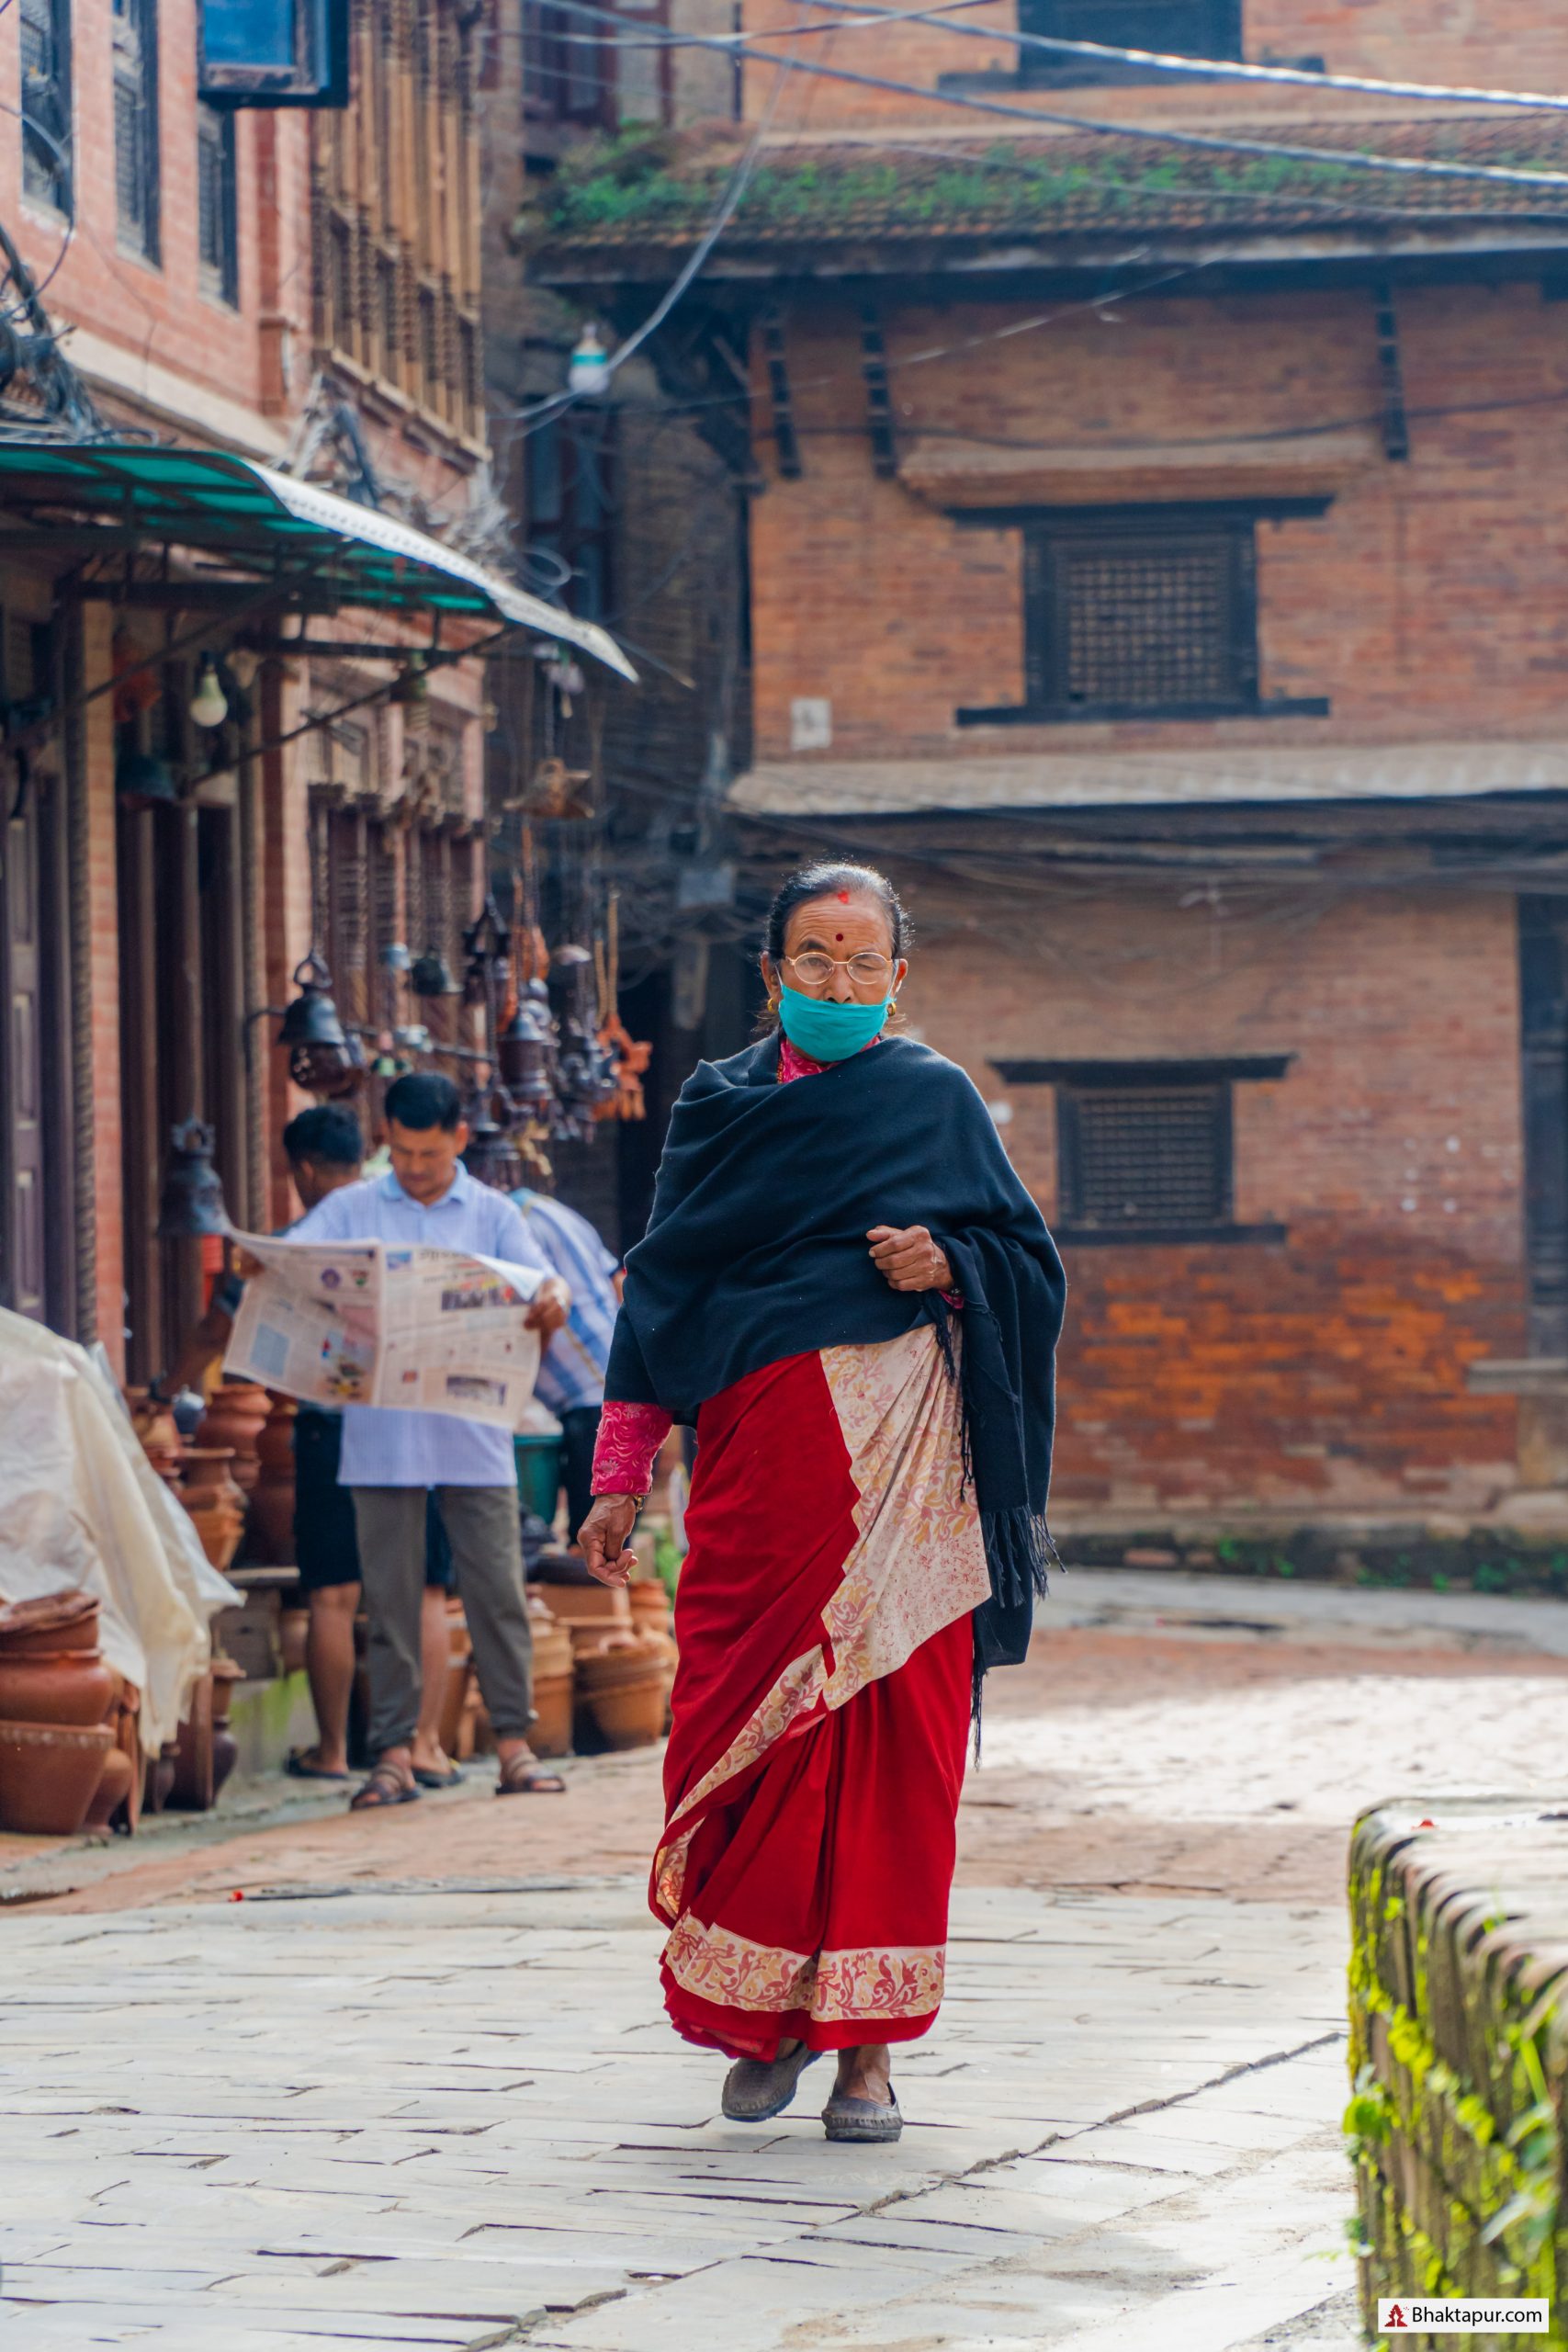 Faces of Bhaktapur image